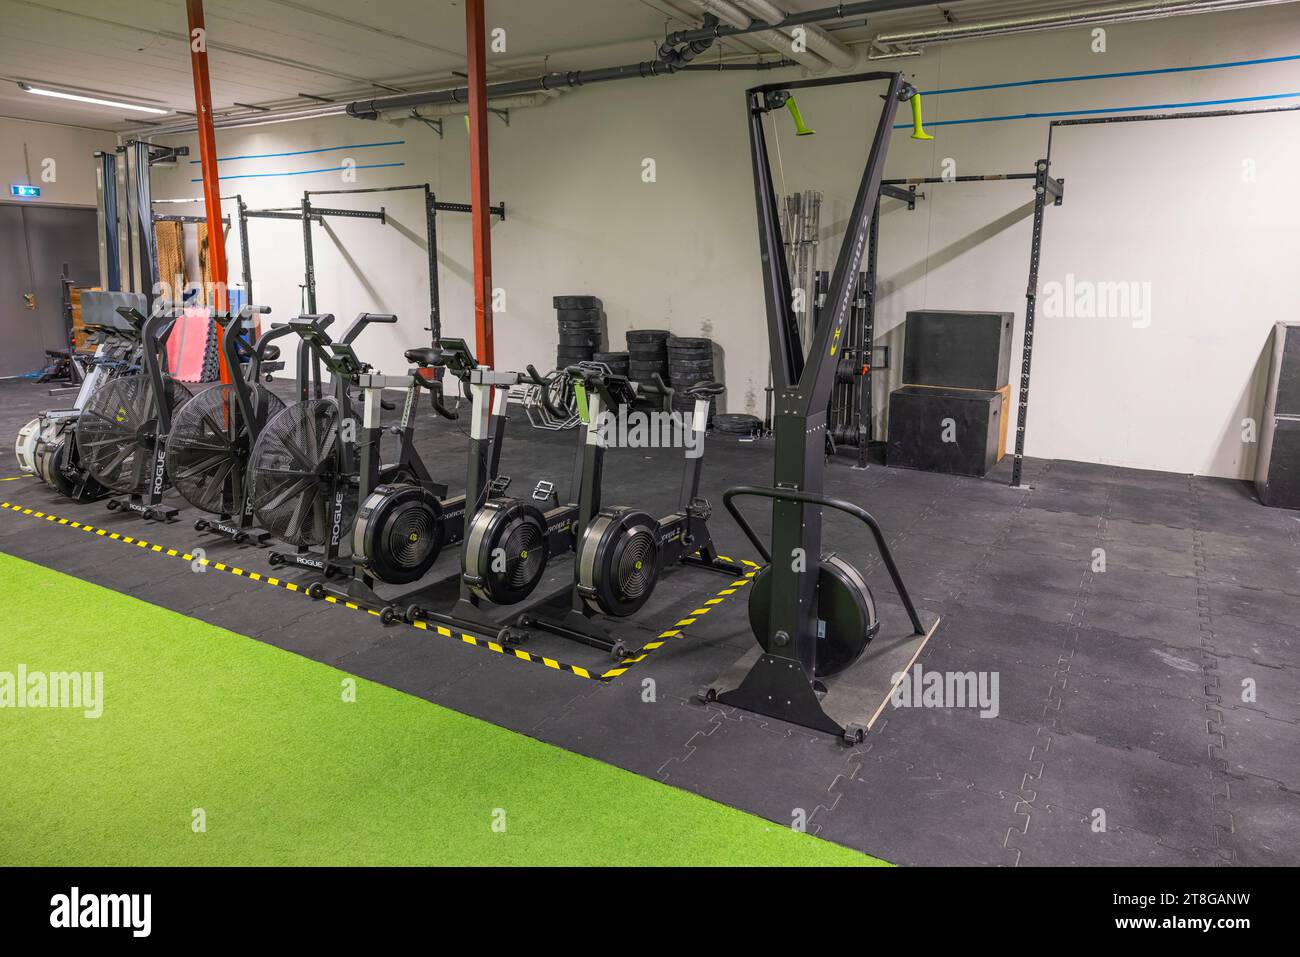 Gym with diverse equipment—strength machines, promoting healthy lifestyle. Stock Photo